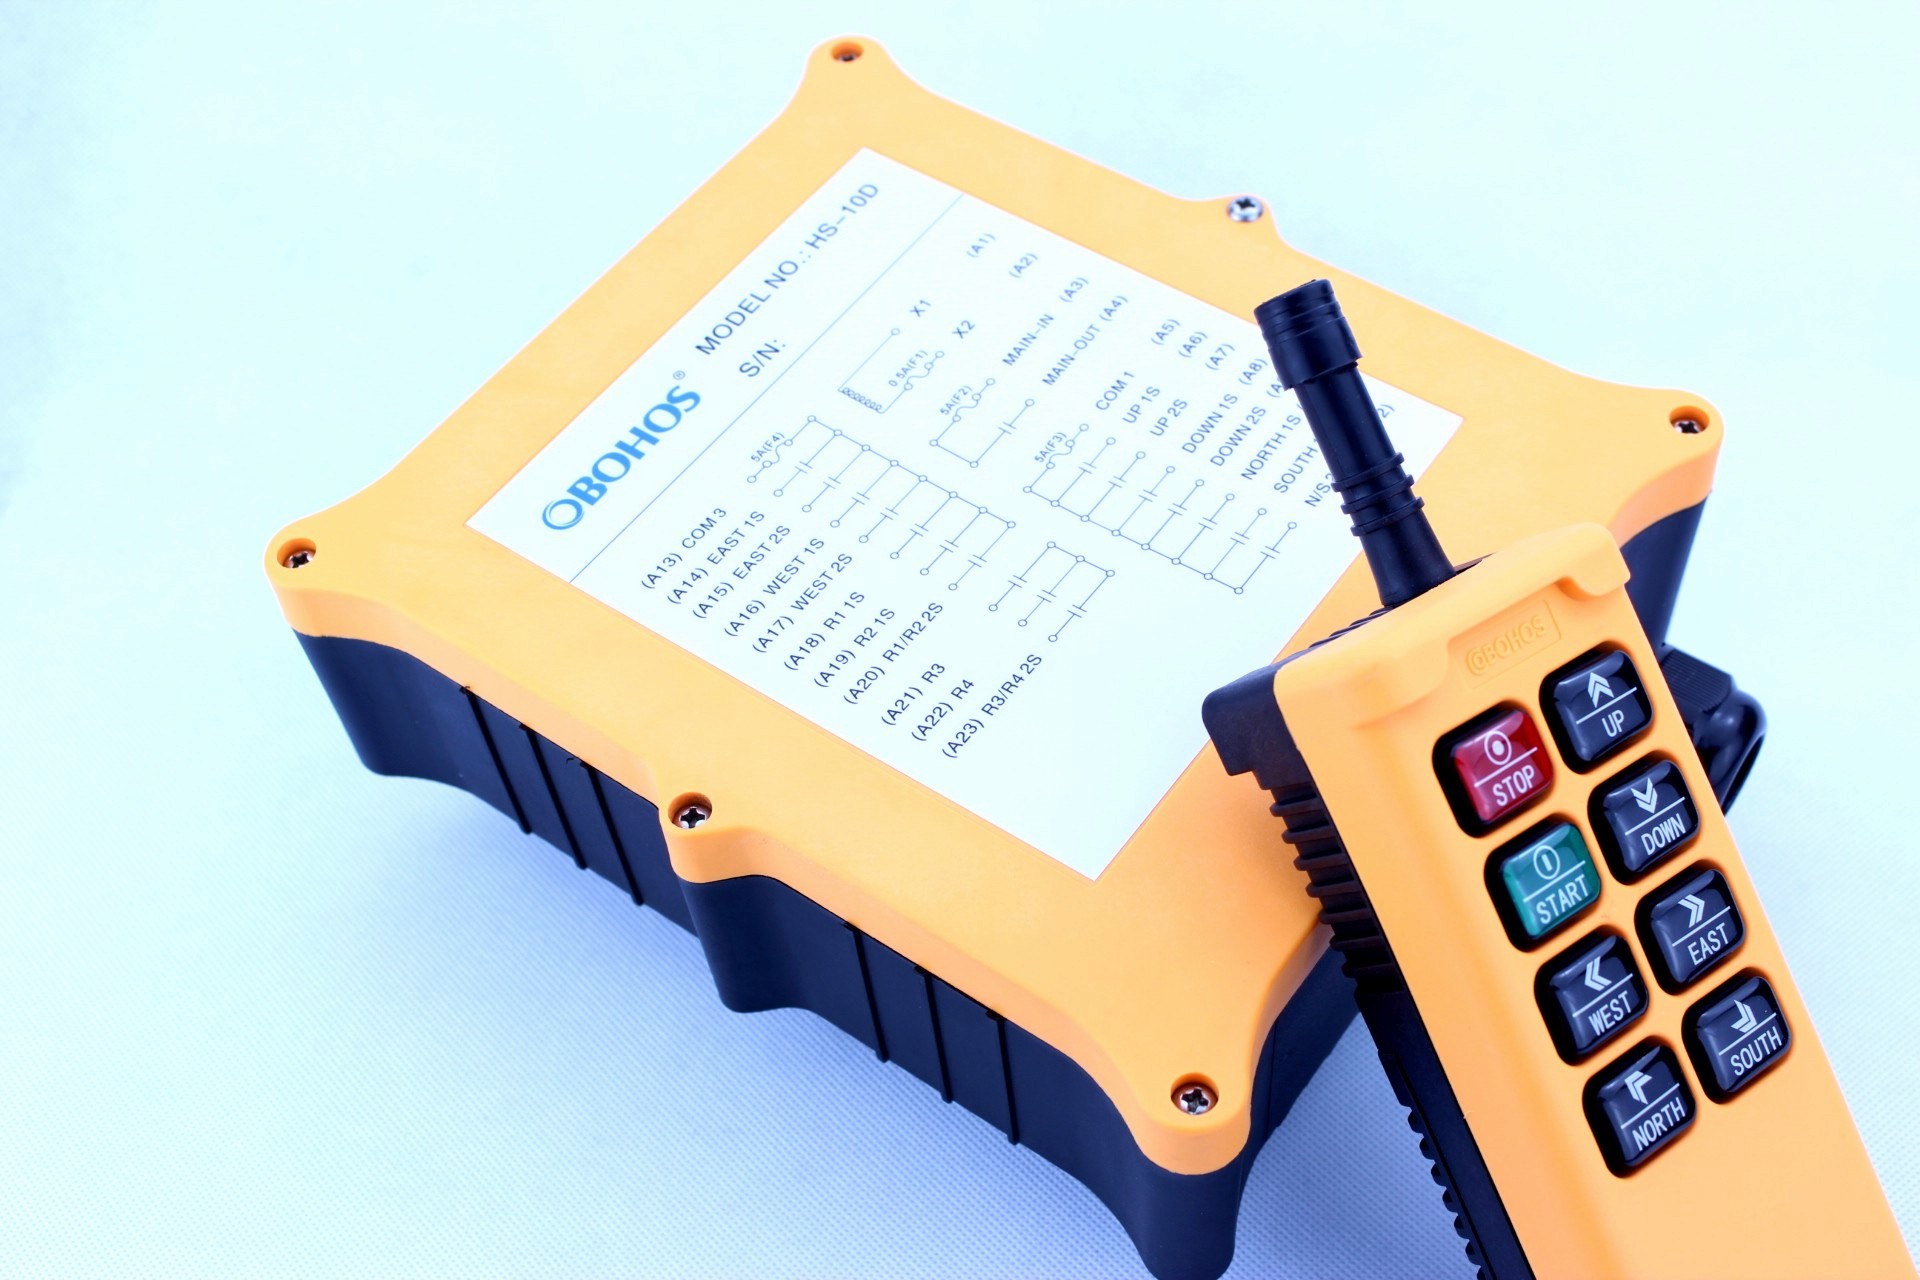 HS-8D6 Double Speed Industrial Wireless Remote Control System for Crane Hoist